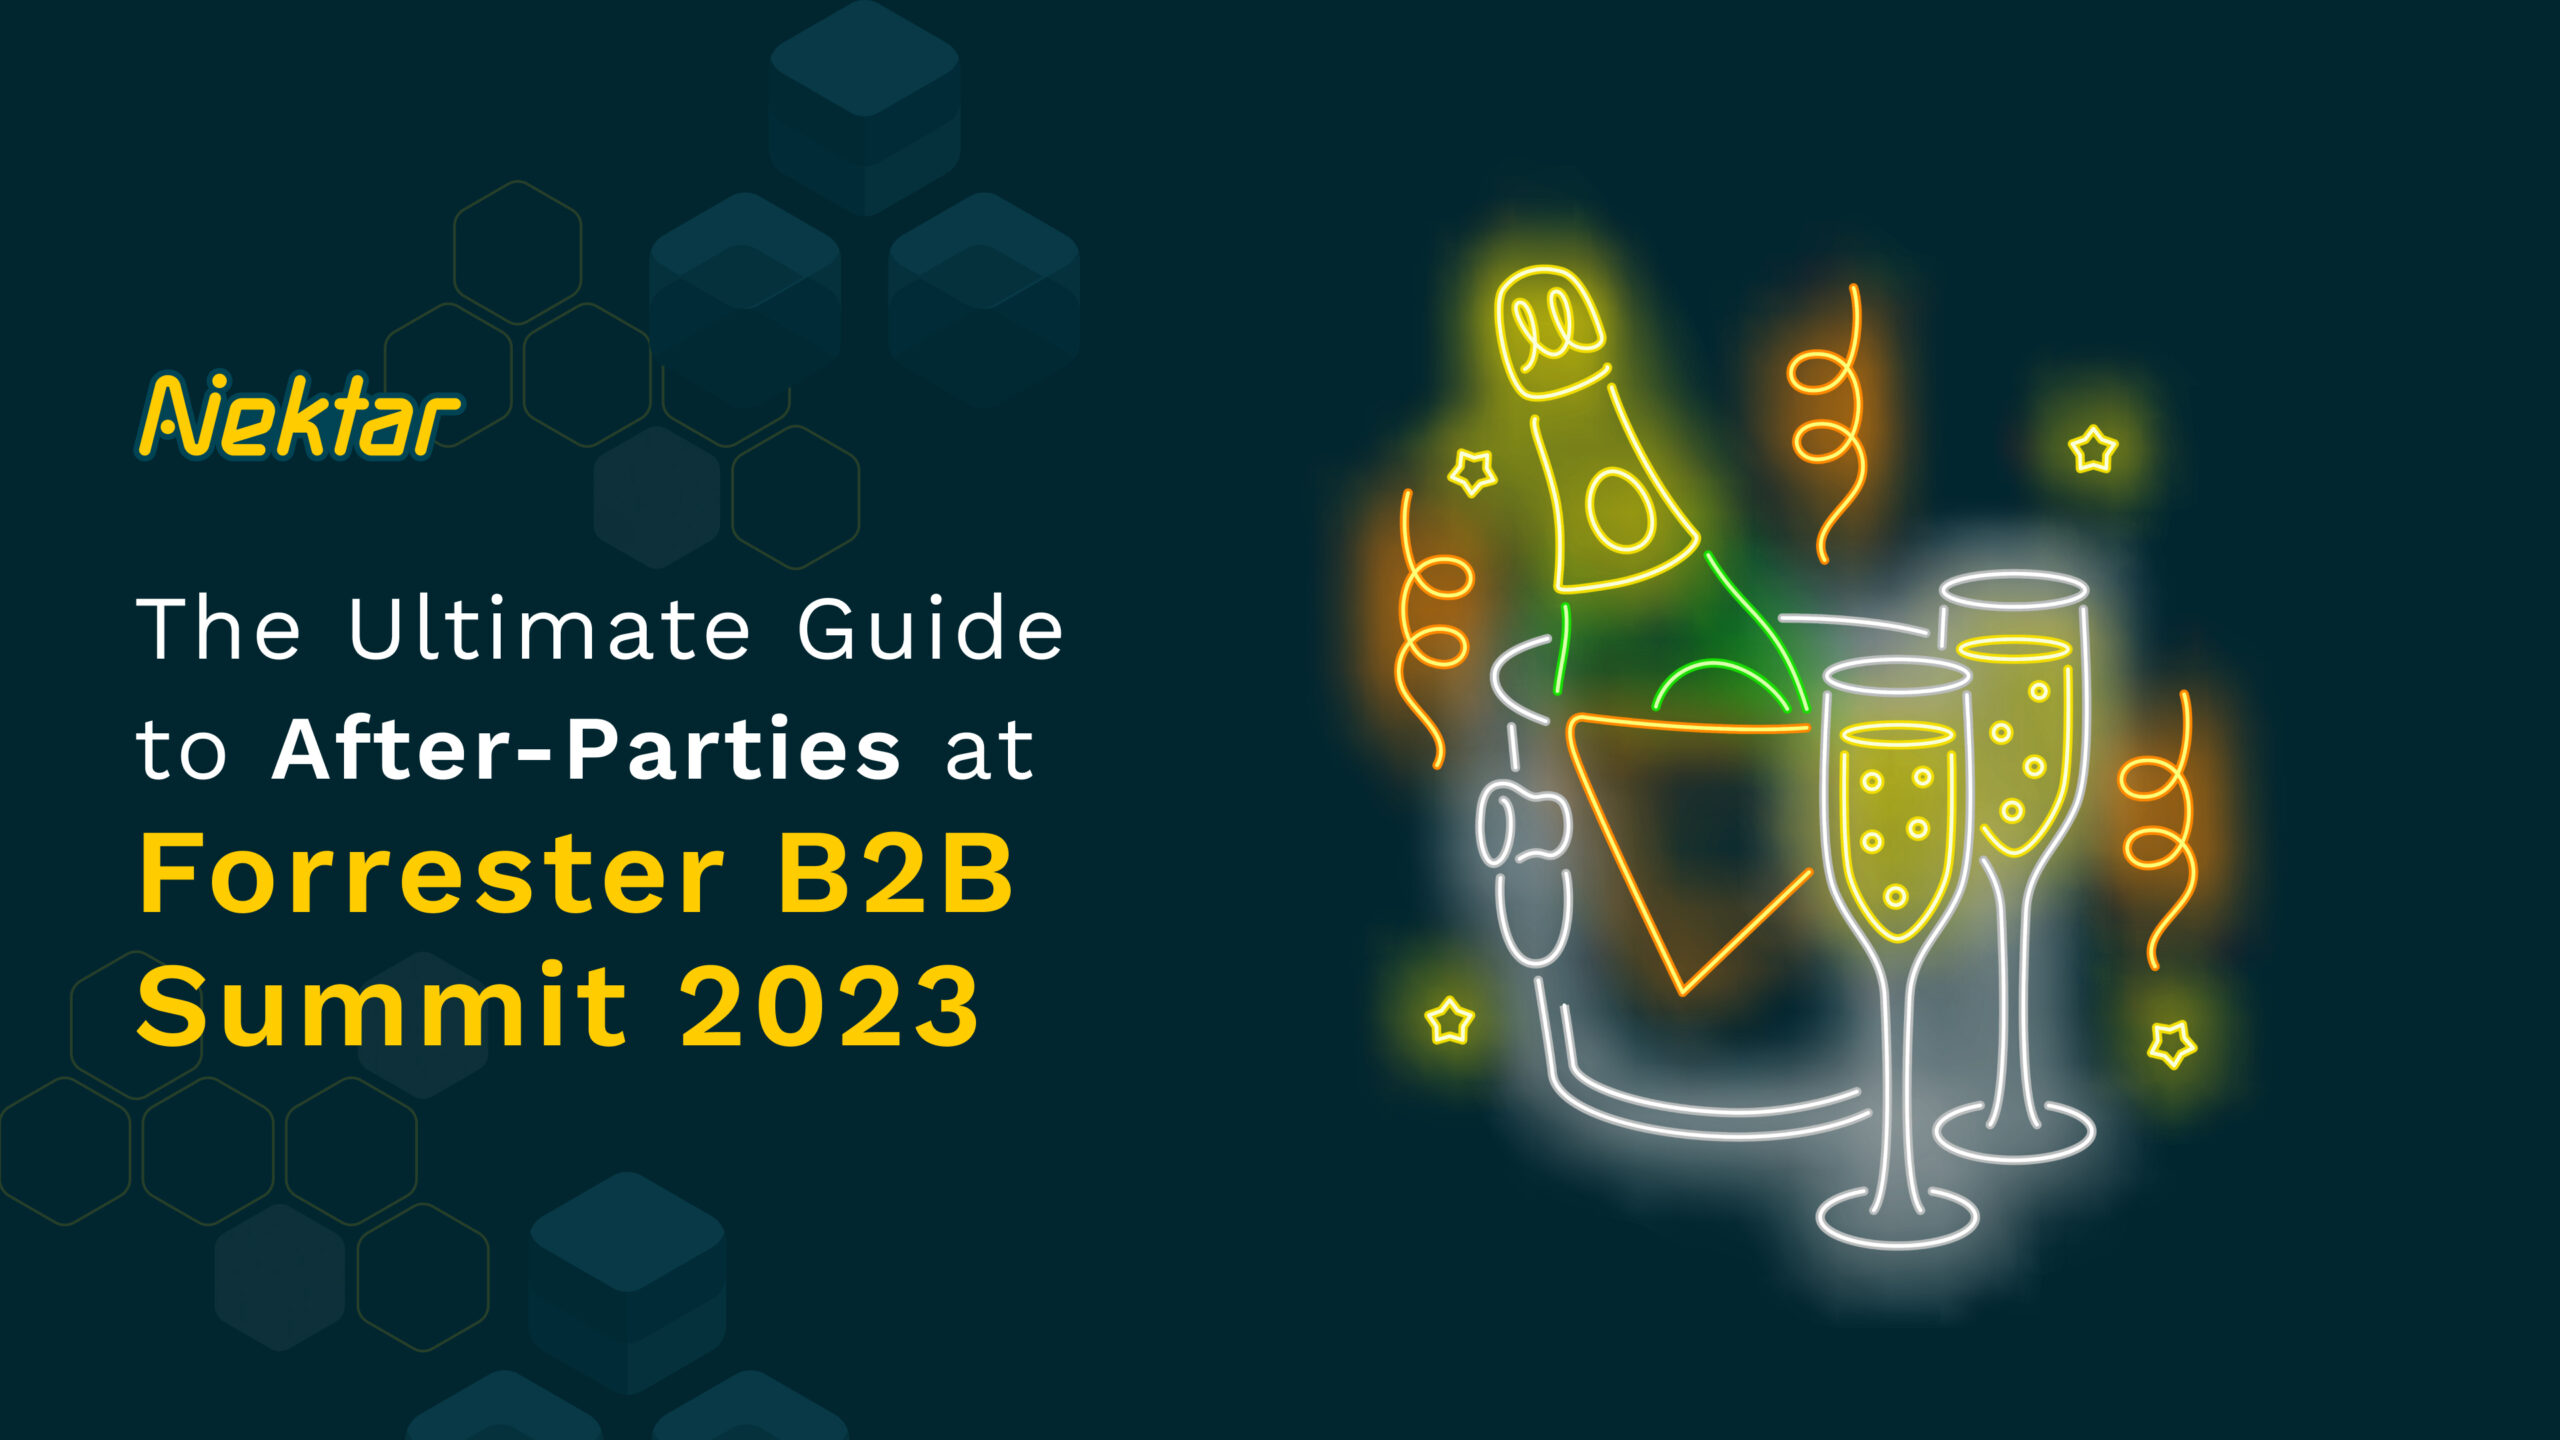 Feature image: The Ultimate Guide to after-parties at Forrester B2B Summit 2023